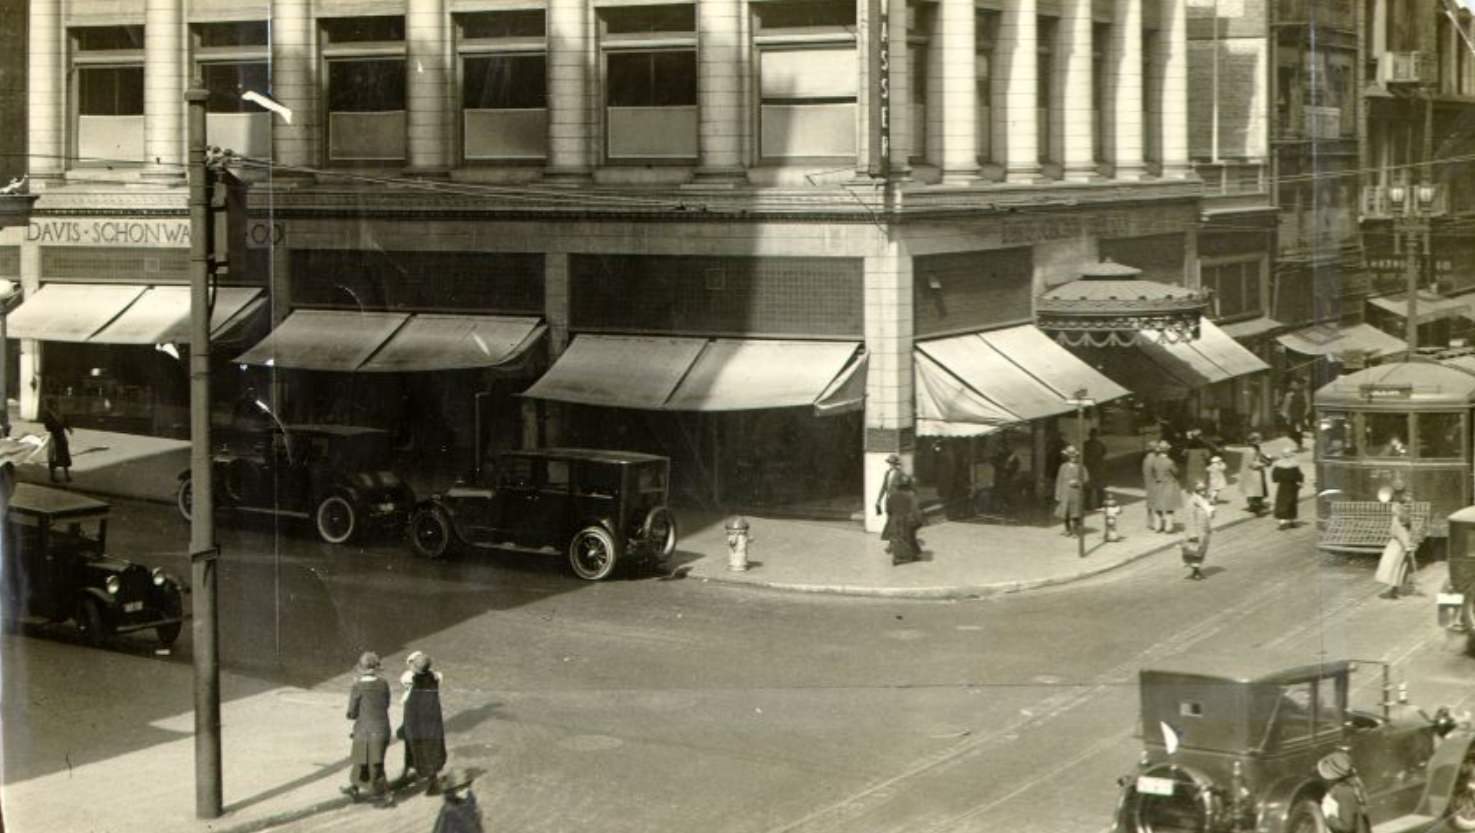 Corner of Sutter Street and Grant Avenue in the 1920s